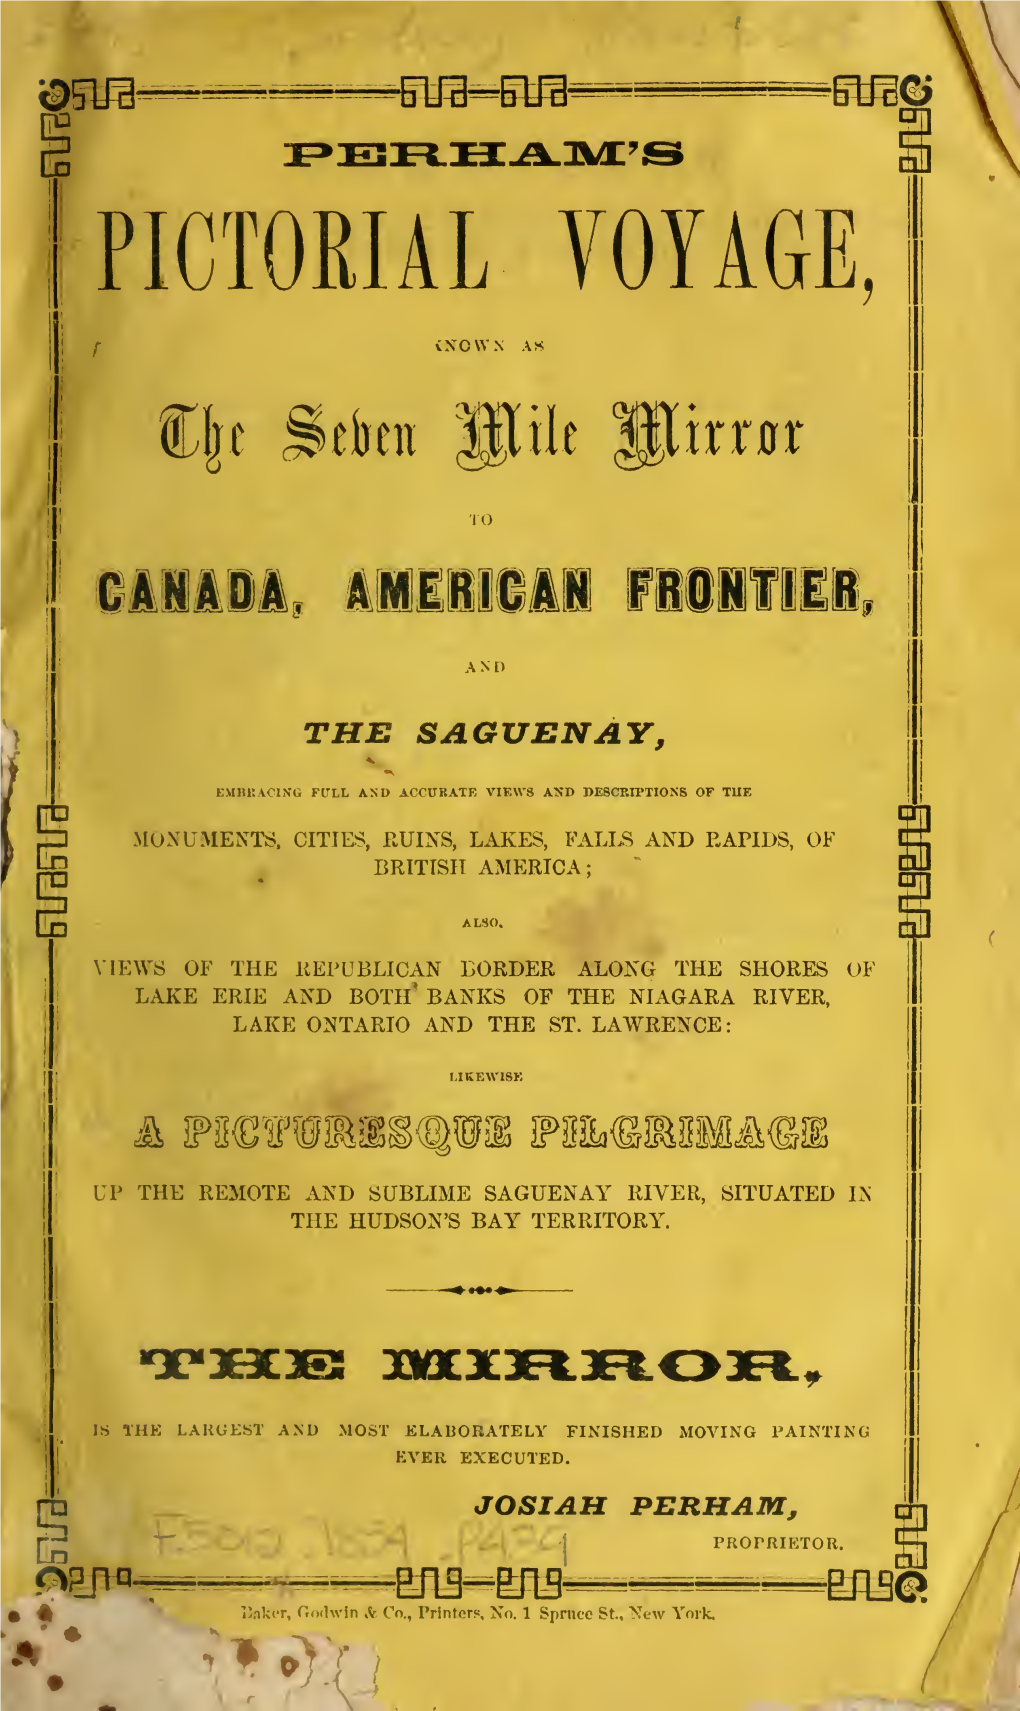 Descriptive and Historical View of the Seven Mile Mirror of the Lakes